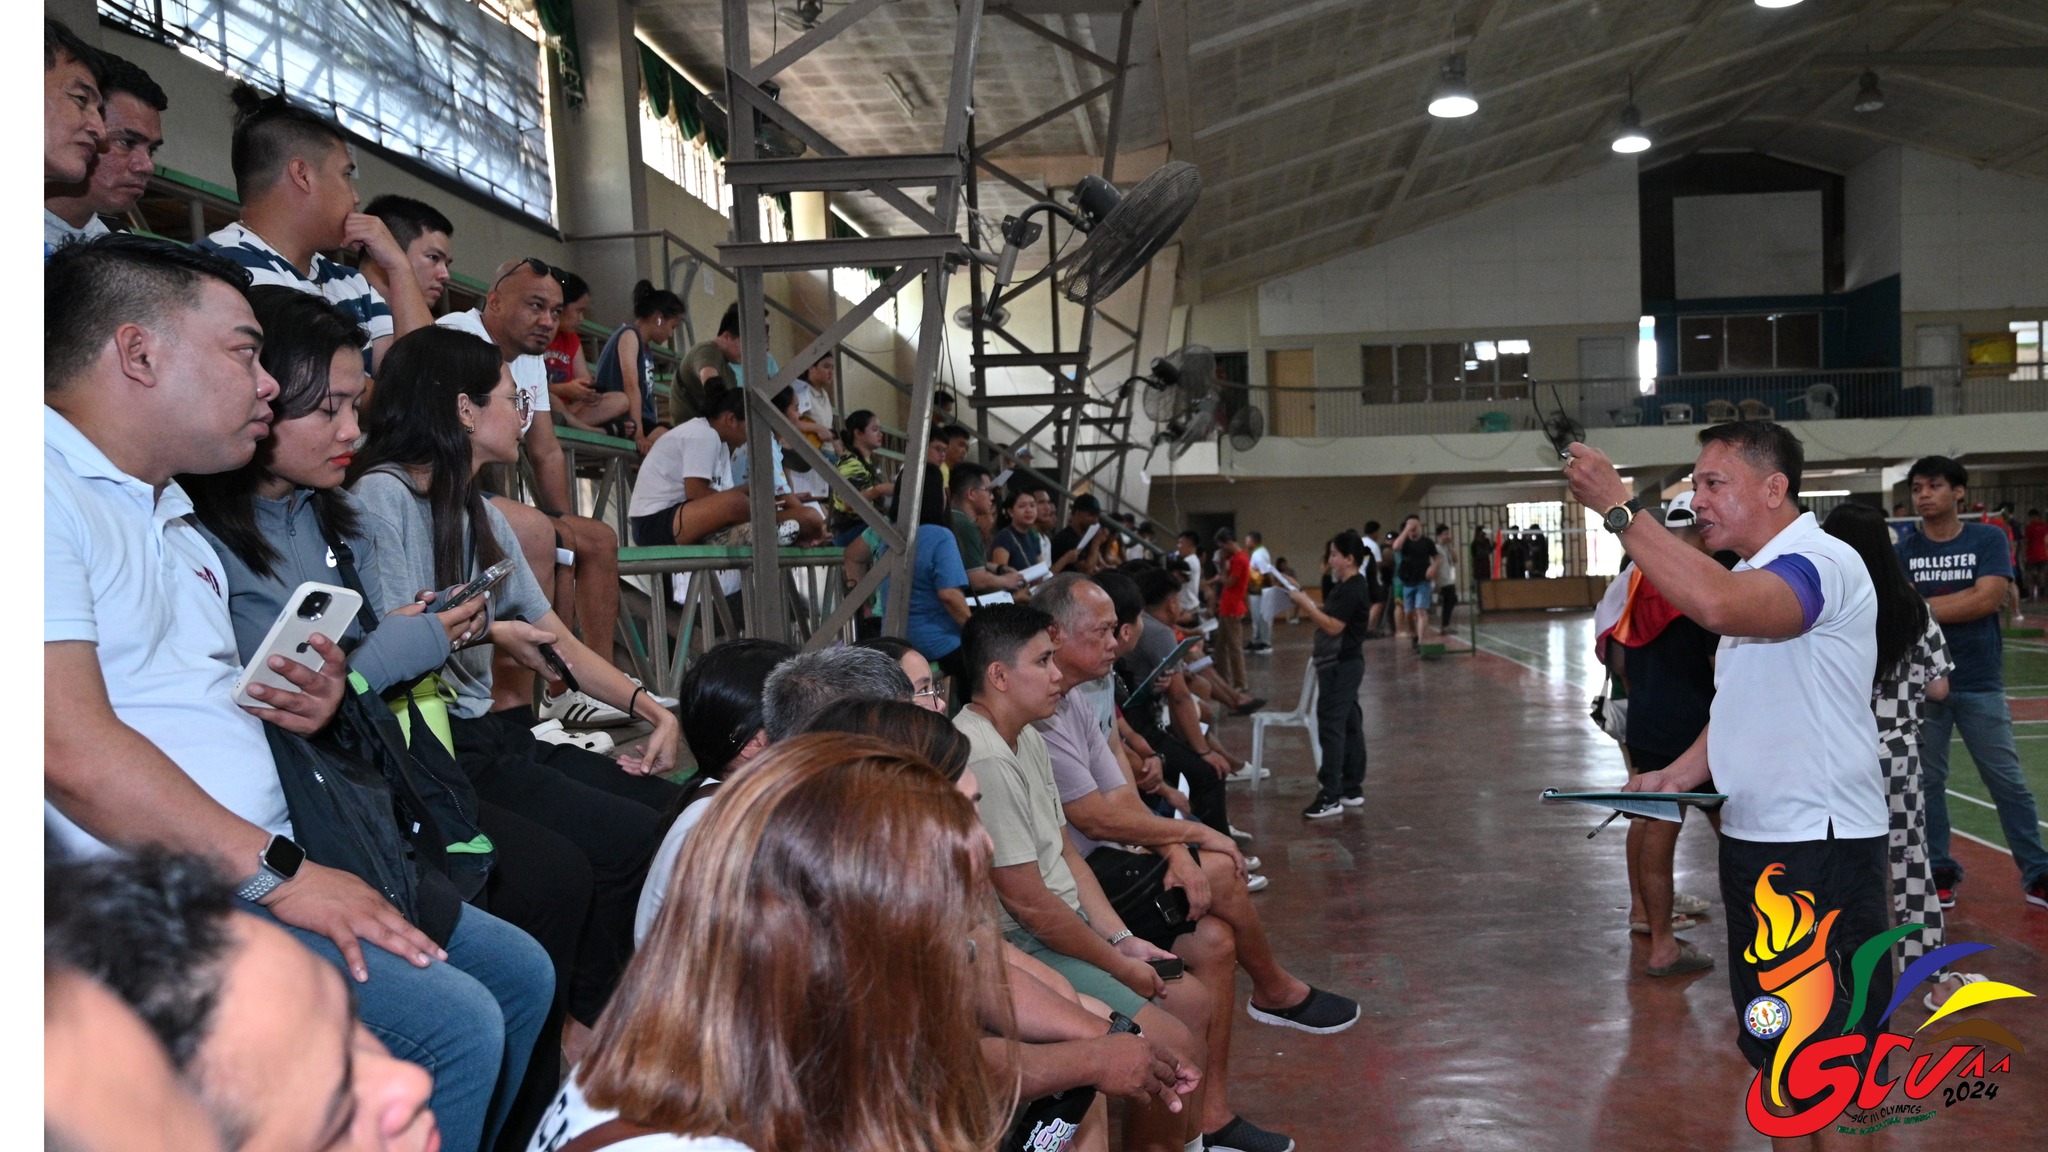 𝐂𝐀𝐏𝐓𝐔𝐑𝐄𝐃 𝐈𝐍 𝐋𝐄𝐍𝐒 | Tournament managers are currently orienting the coaches of participating SUCs for the ground rules of 18 sporting events of SUC III Olympics which is hosted by Tarlac Agricultural University from 19-24 May 2024.